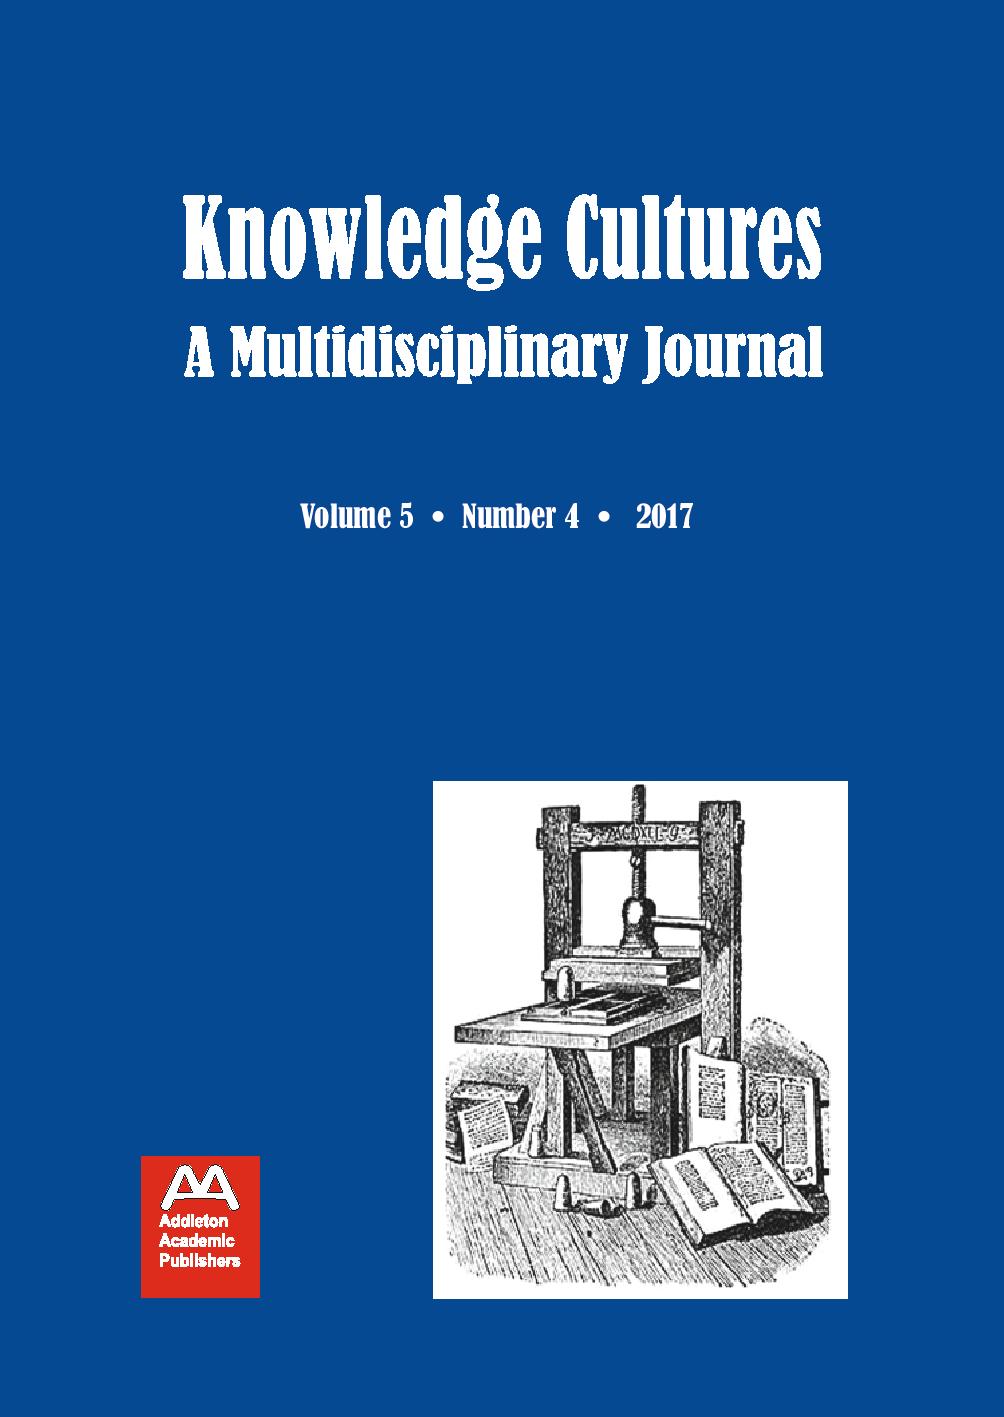 INTRODUCTION: CRITICAL CULTURES OF KNOWLEDGE Cover Image